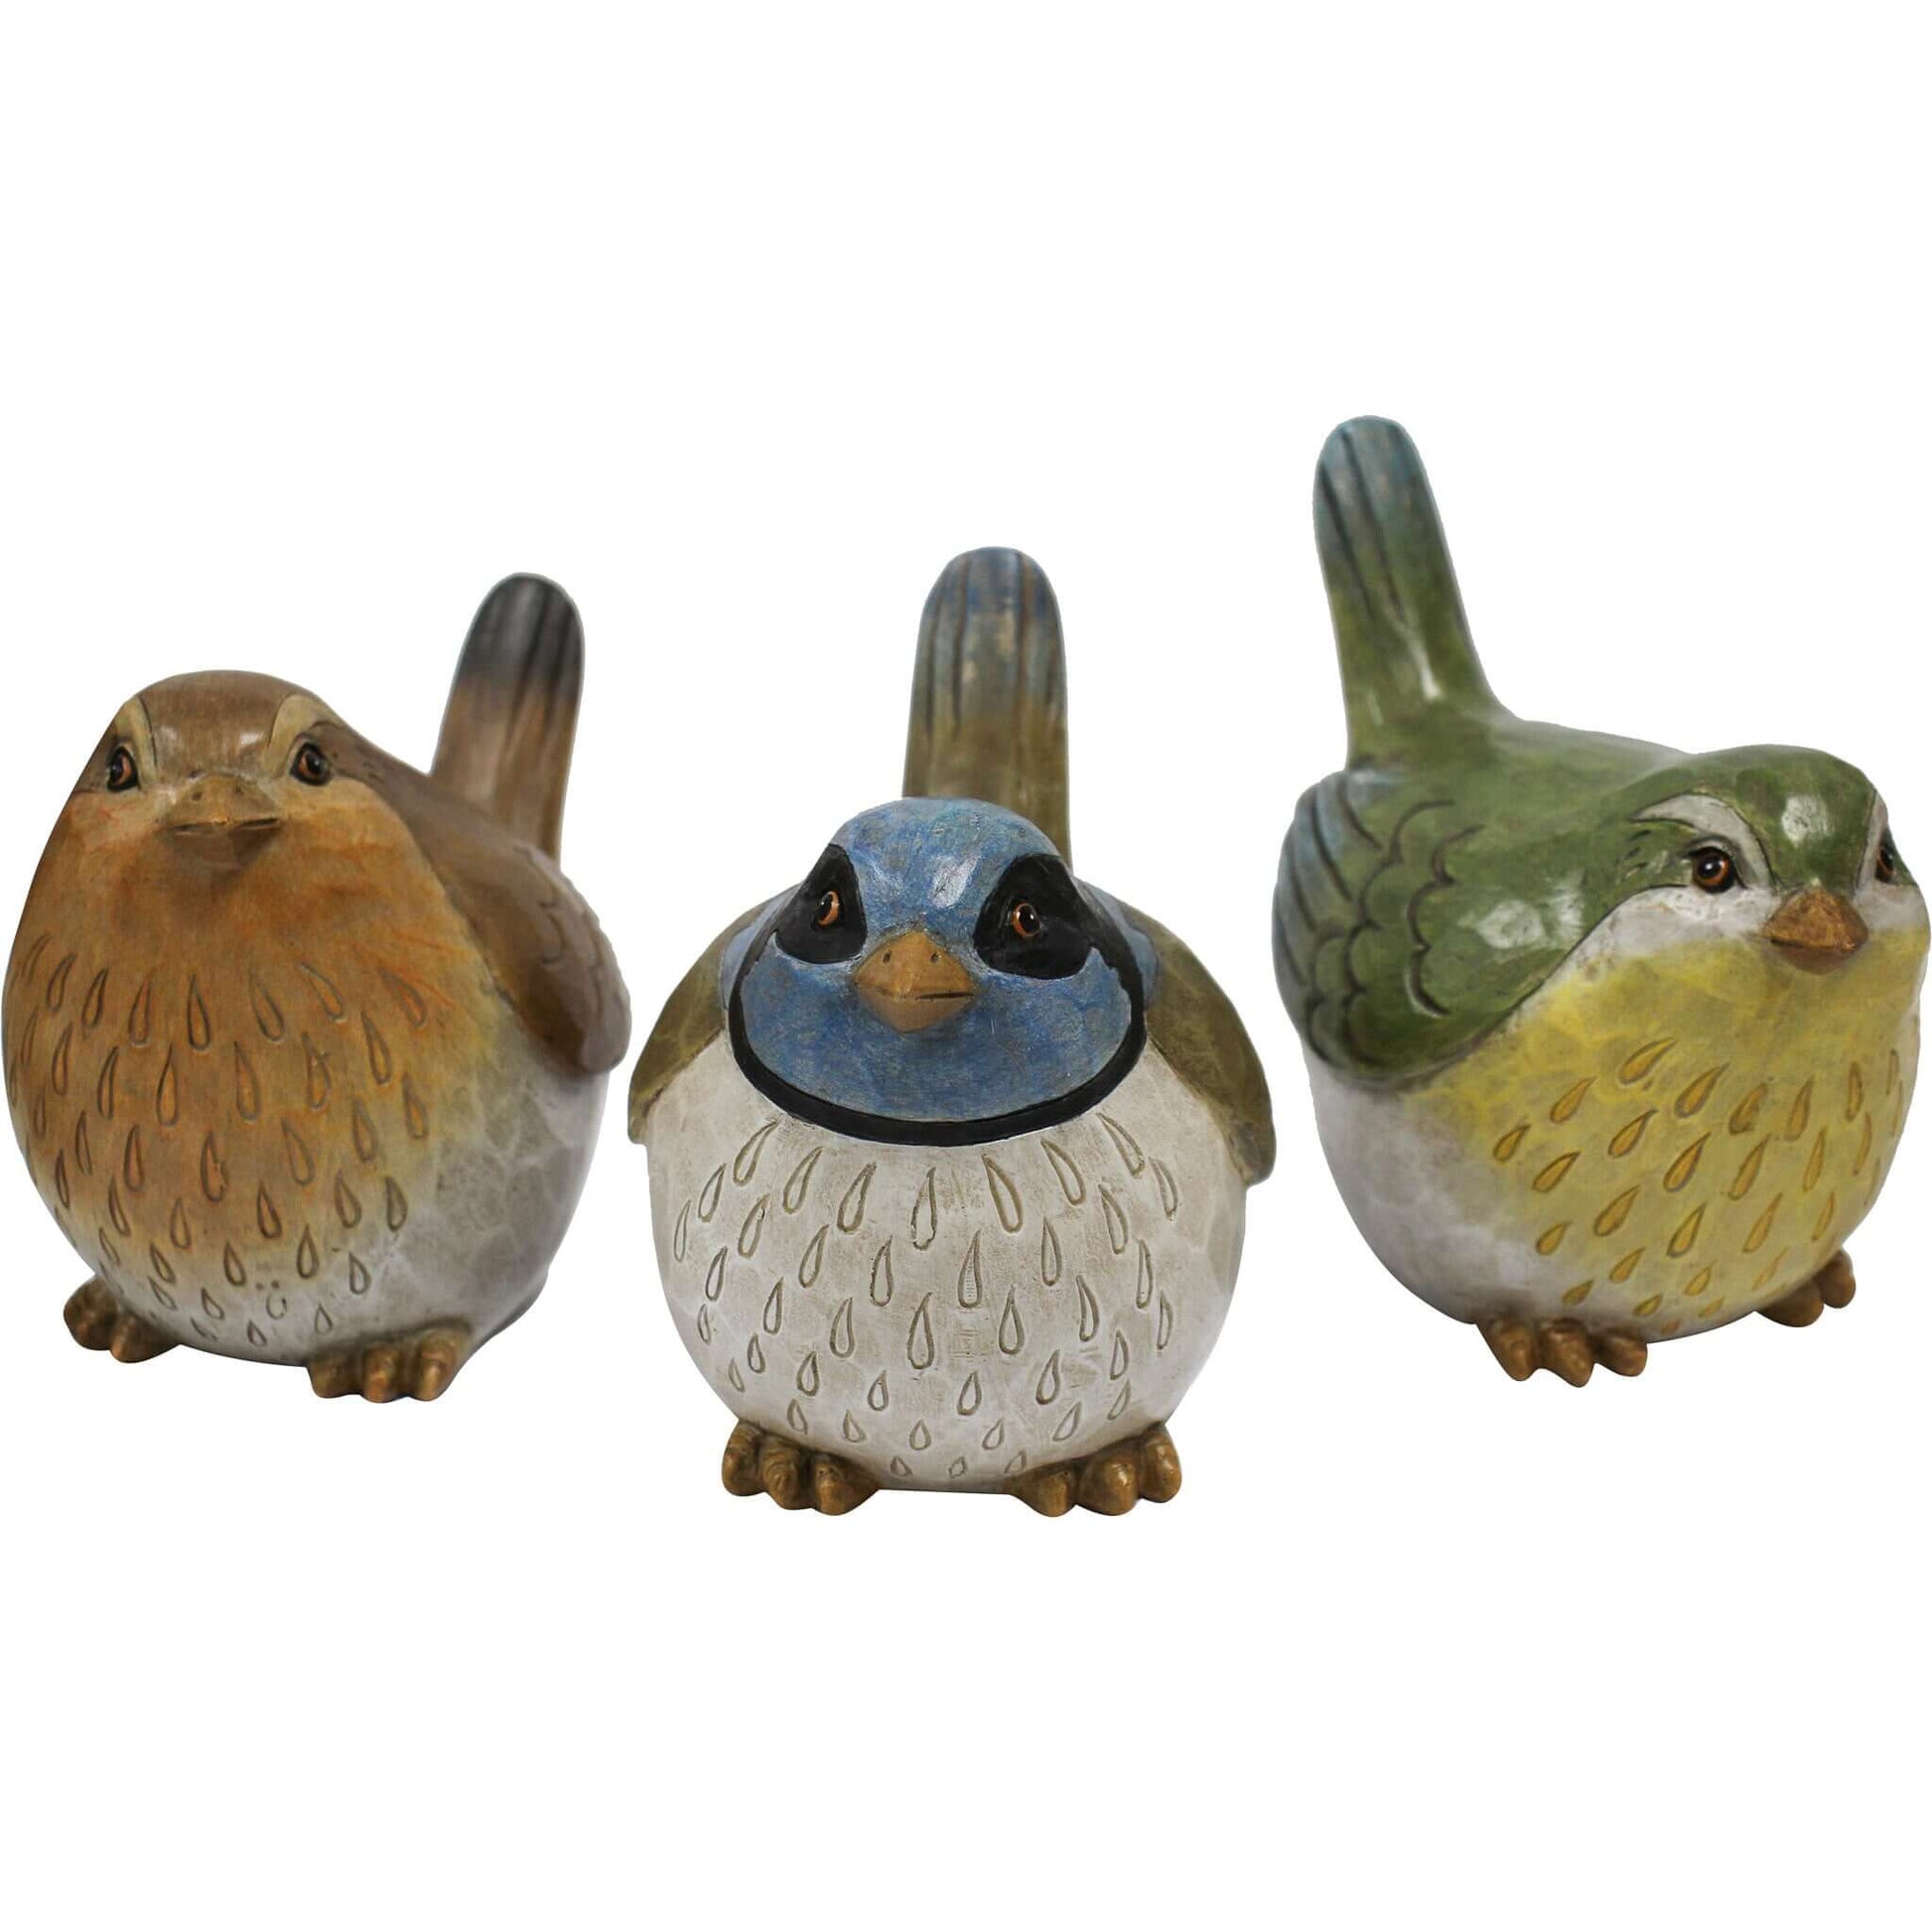 Bird Brilliant Set of 3 Ornament - The Renmy Store Homewares & Gifts 